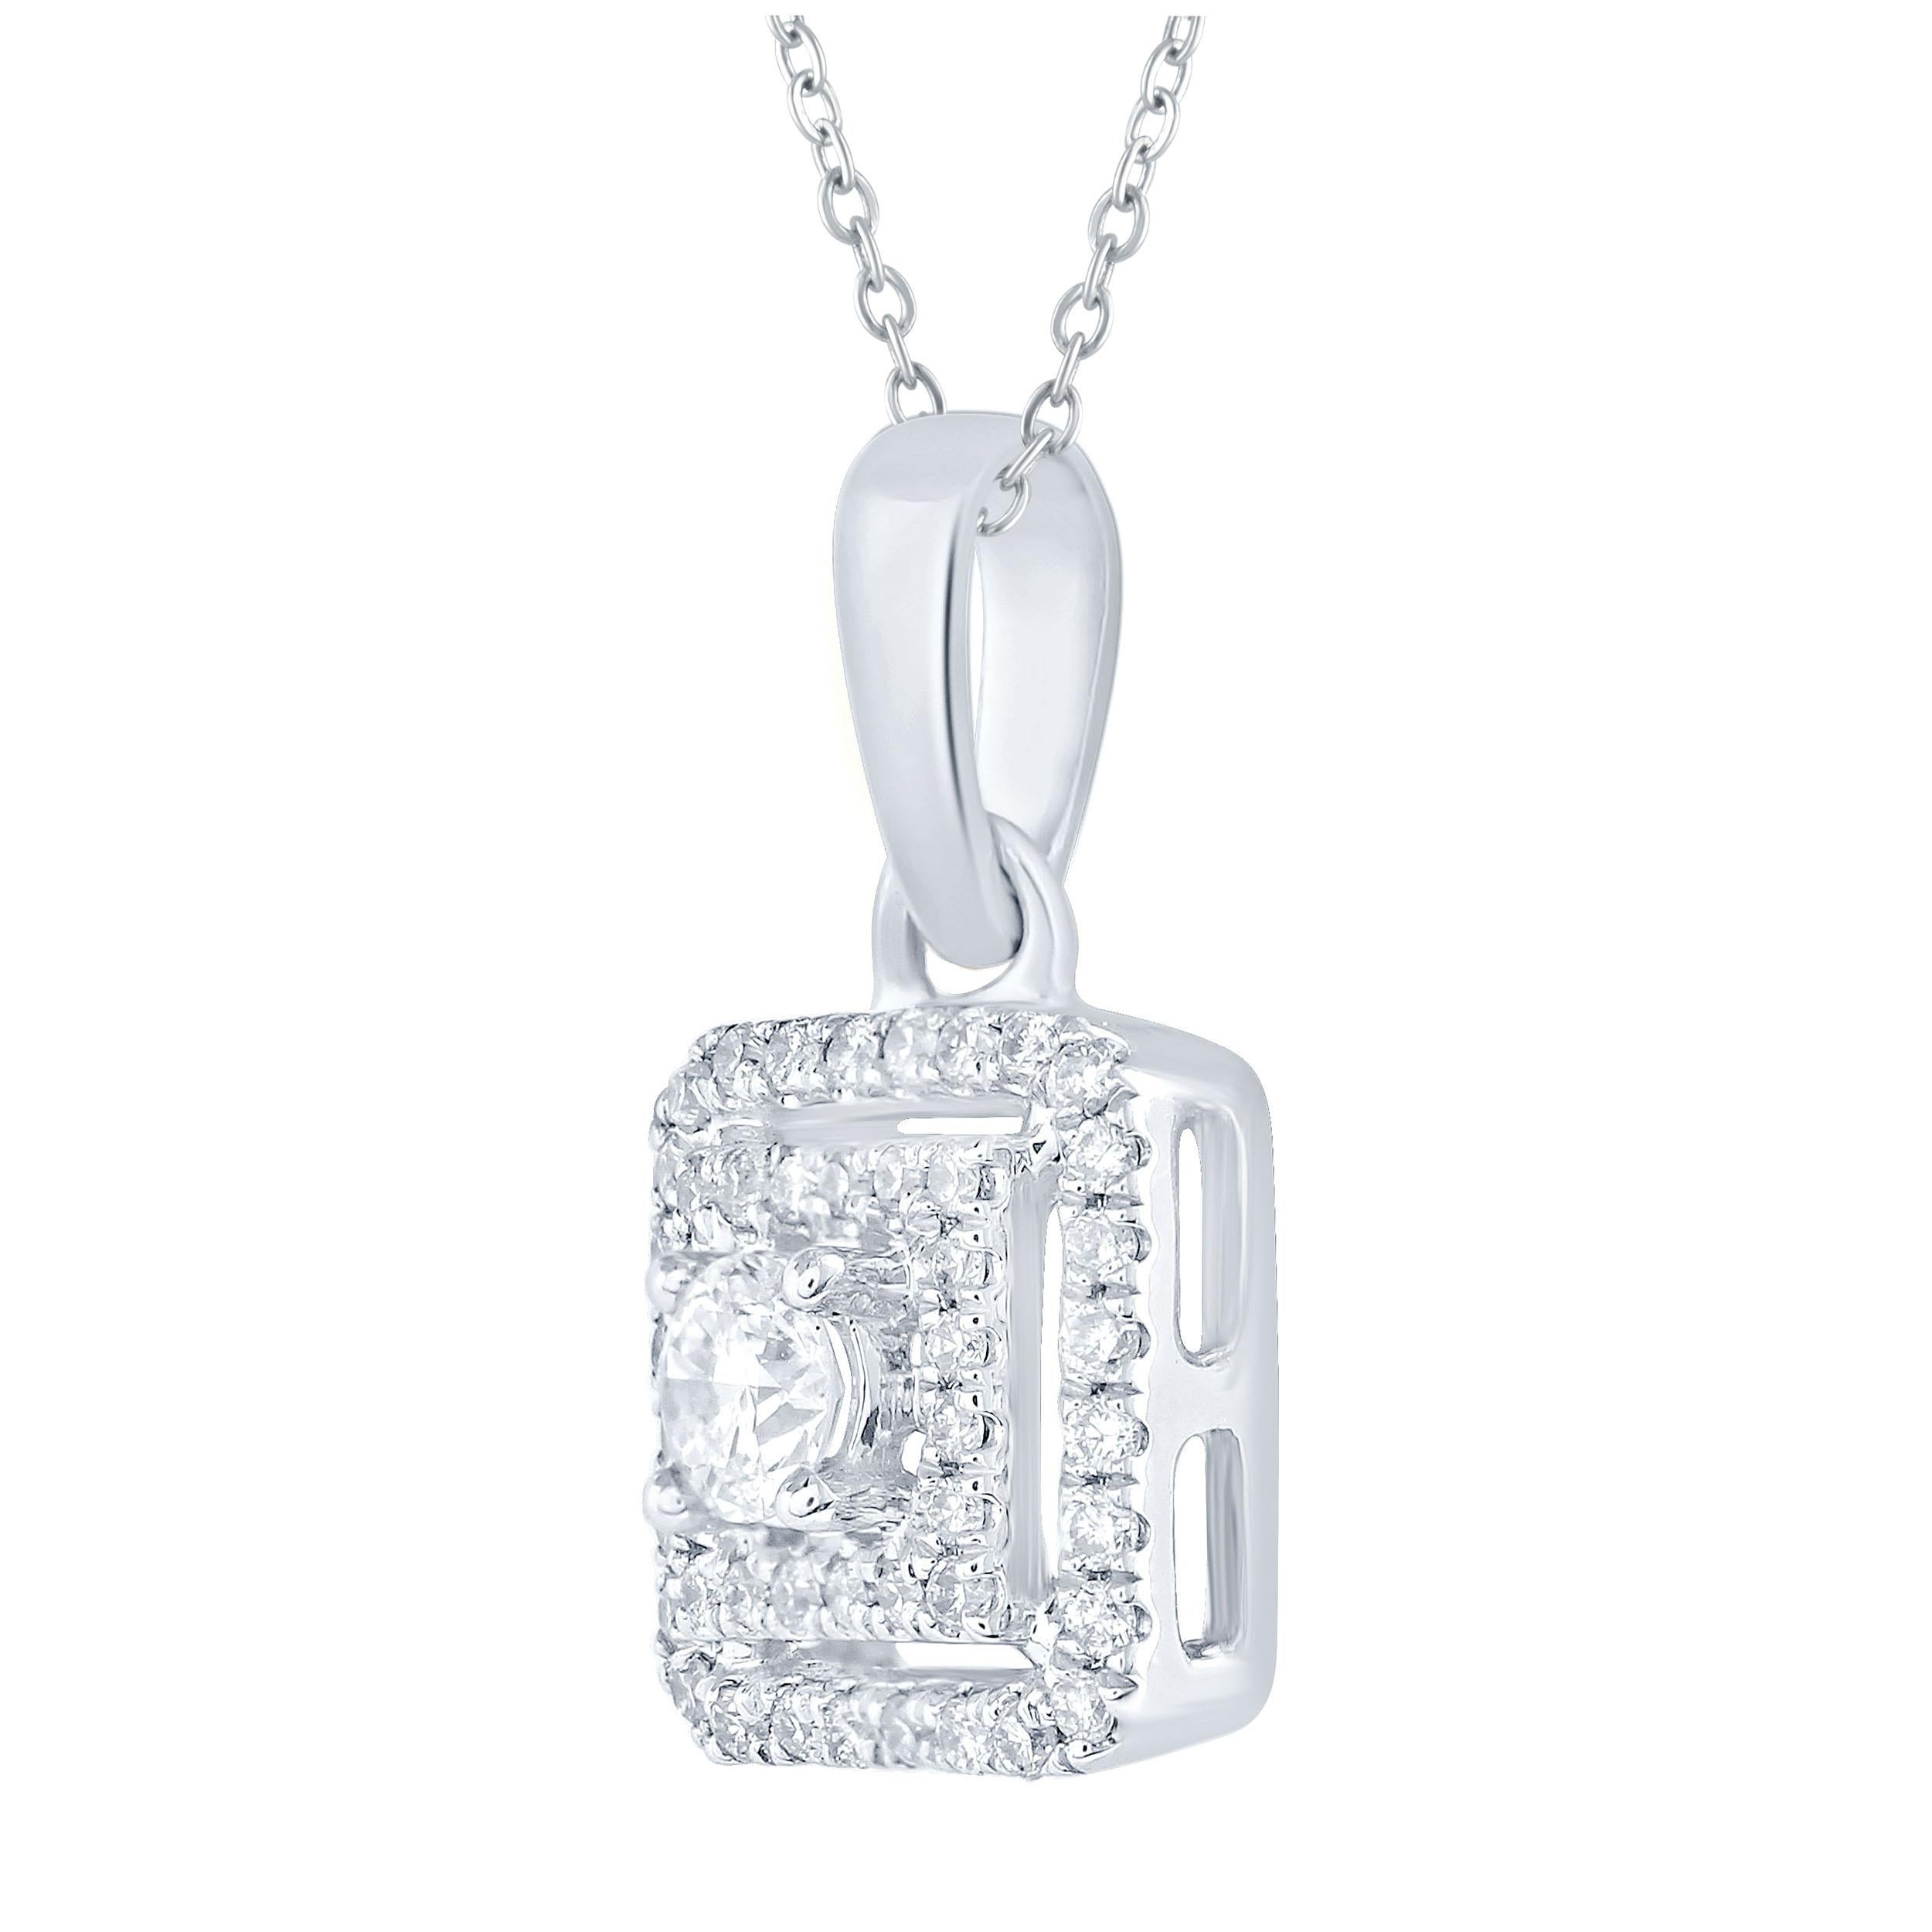 Make a statement with this stunning piece of jewelry. Each certified diamond is carefully set. All high quality and ethically sourced diamonds are IGI Certified.
Cttw : 0.29 cttw
Kt : 18Kt
Stone Clarity :  GH/i1-i2
